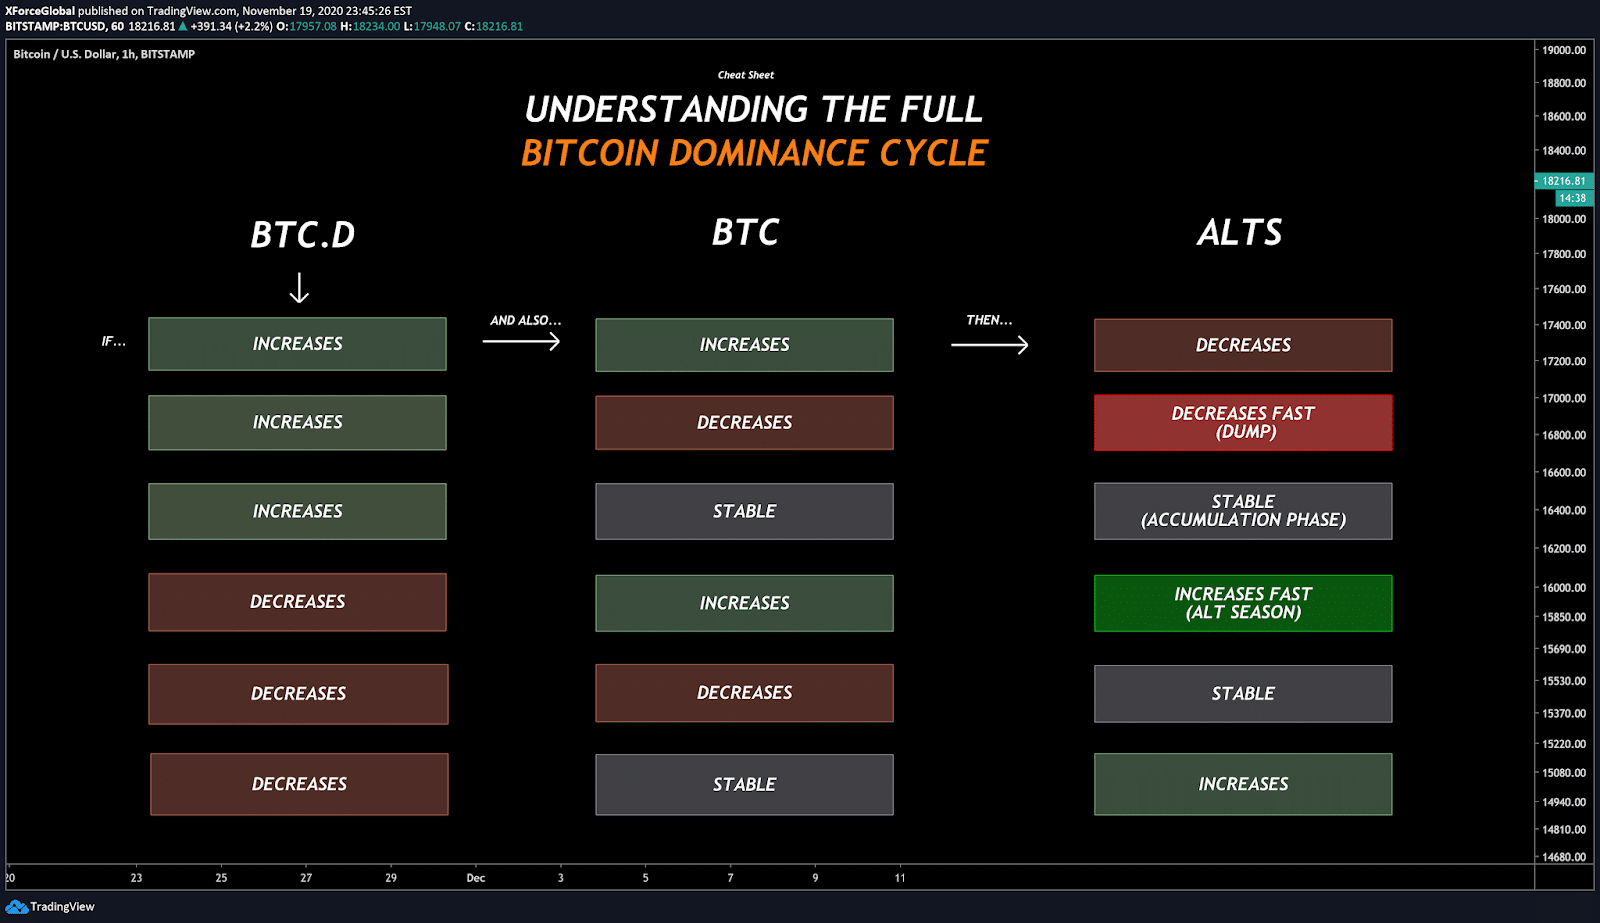 Bitcoin: dominance and altcoin cycles